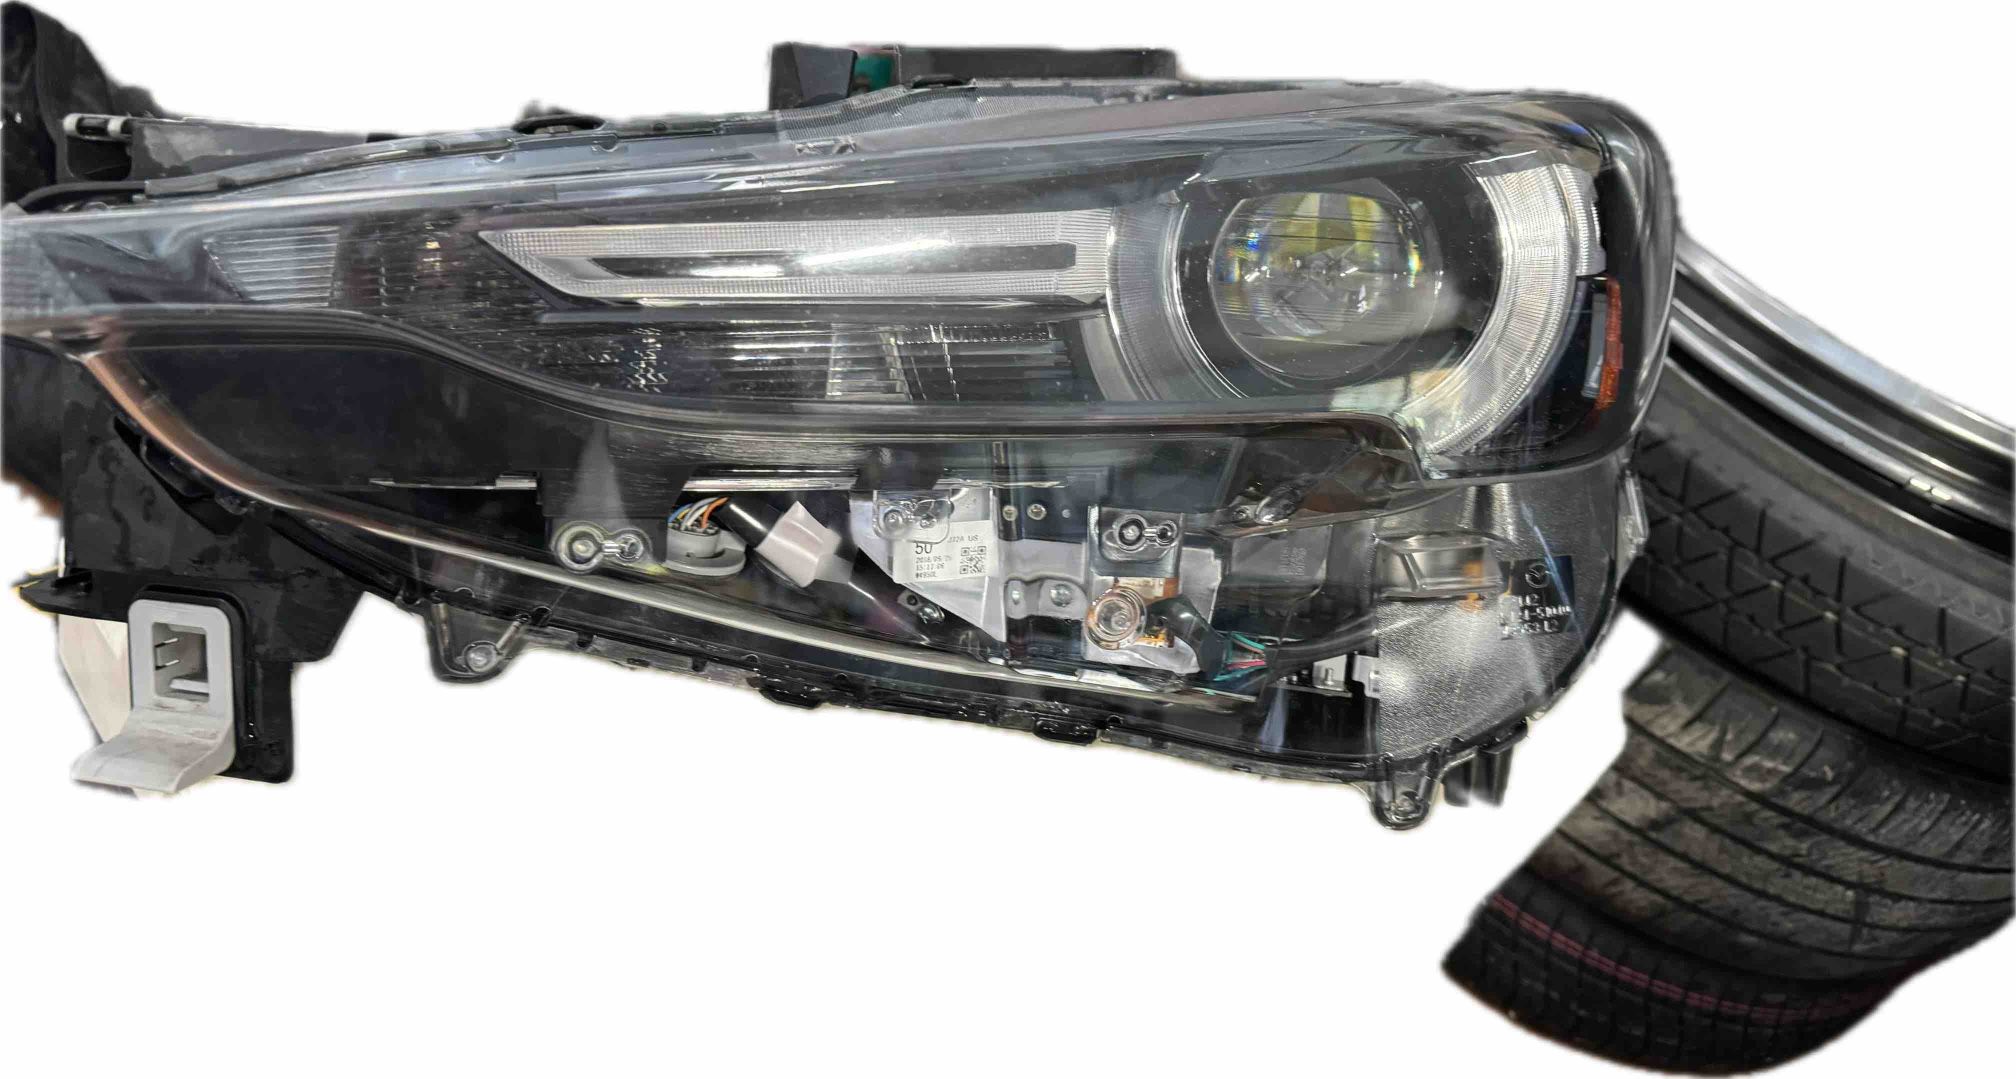 KL2L 51 040  (contact info removed)  (contact info removed)4410  W5 08 7L.  2017-2020 Mazda CX-5 - Driver Side Headlight, with Bulb, LED, Clear Lens